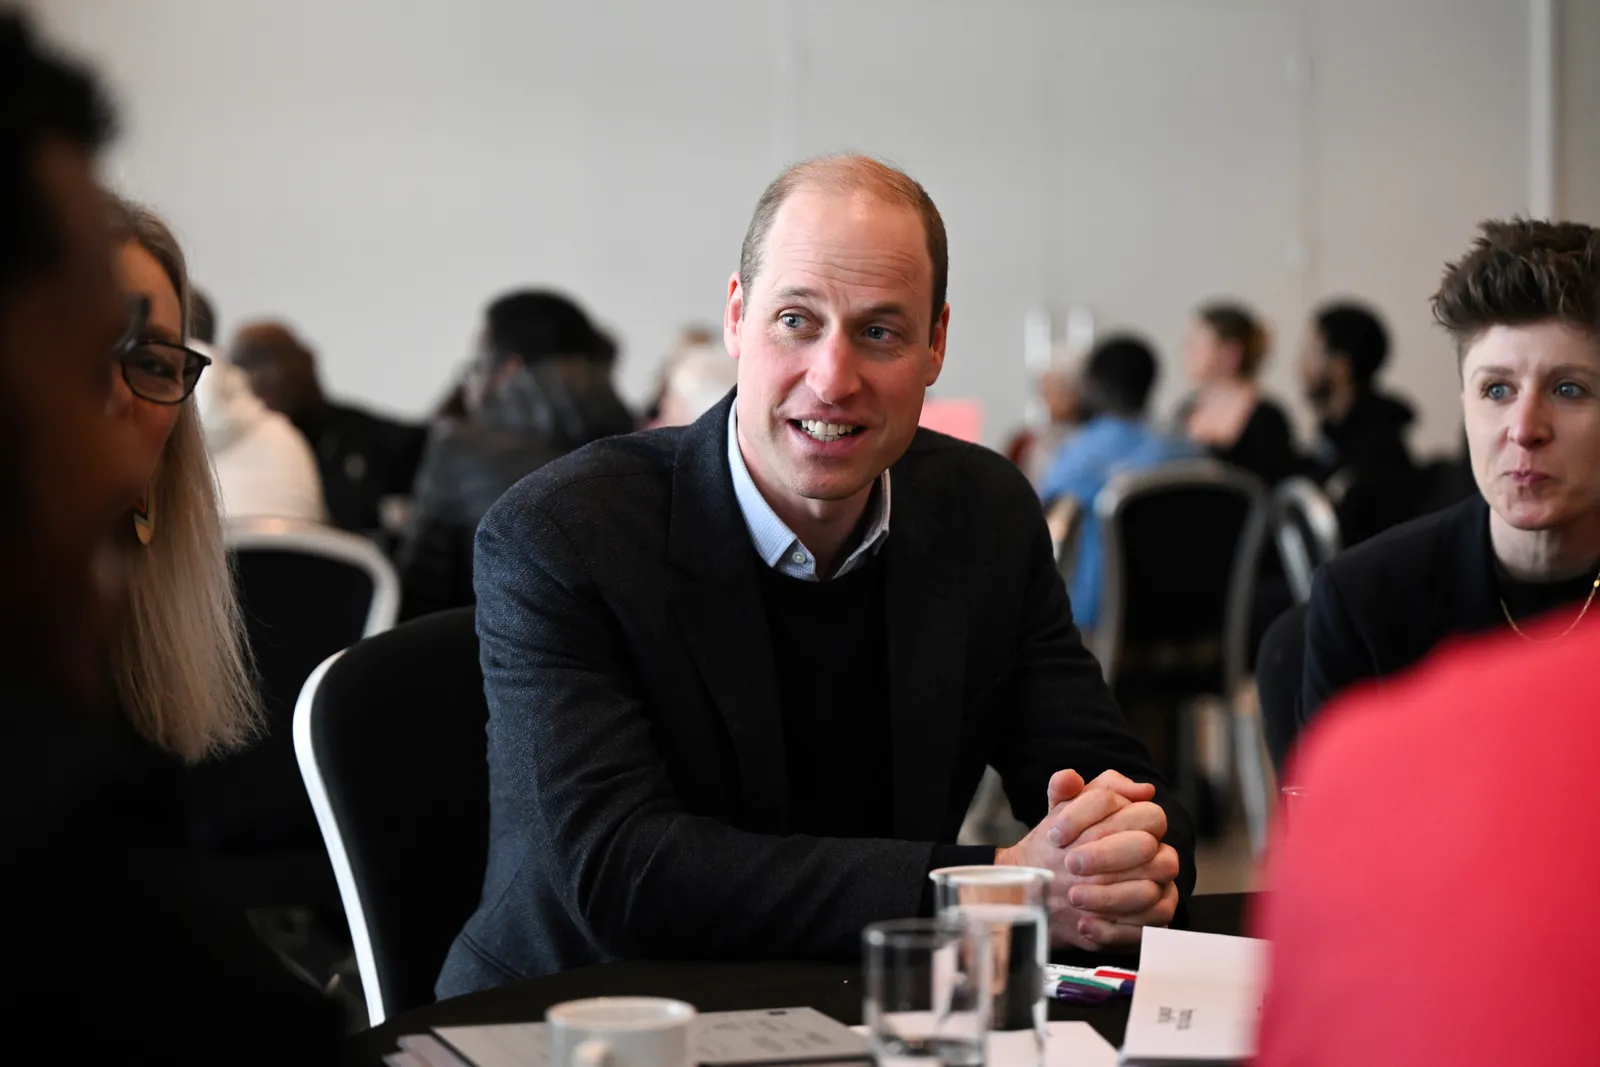 Britain's Prince William faces heightened media attention (Credits: Getty Images)